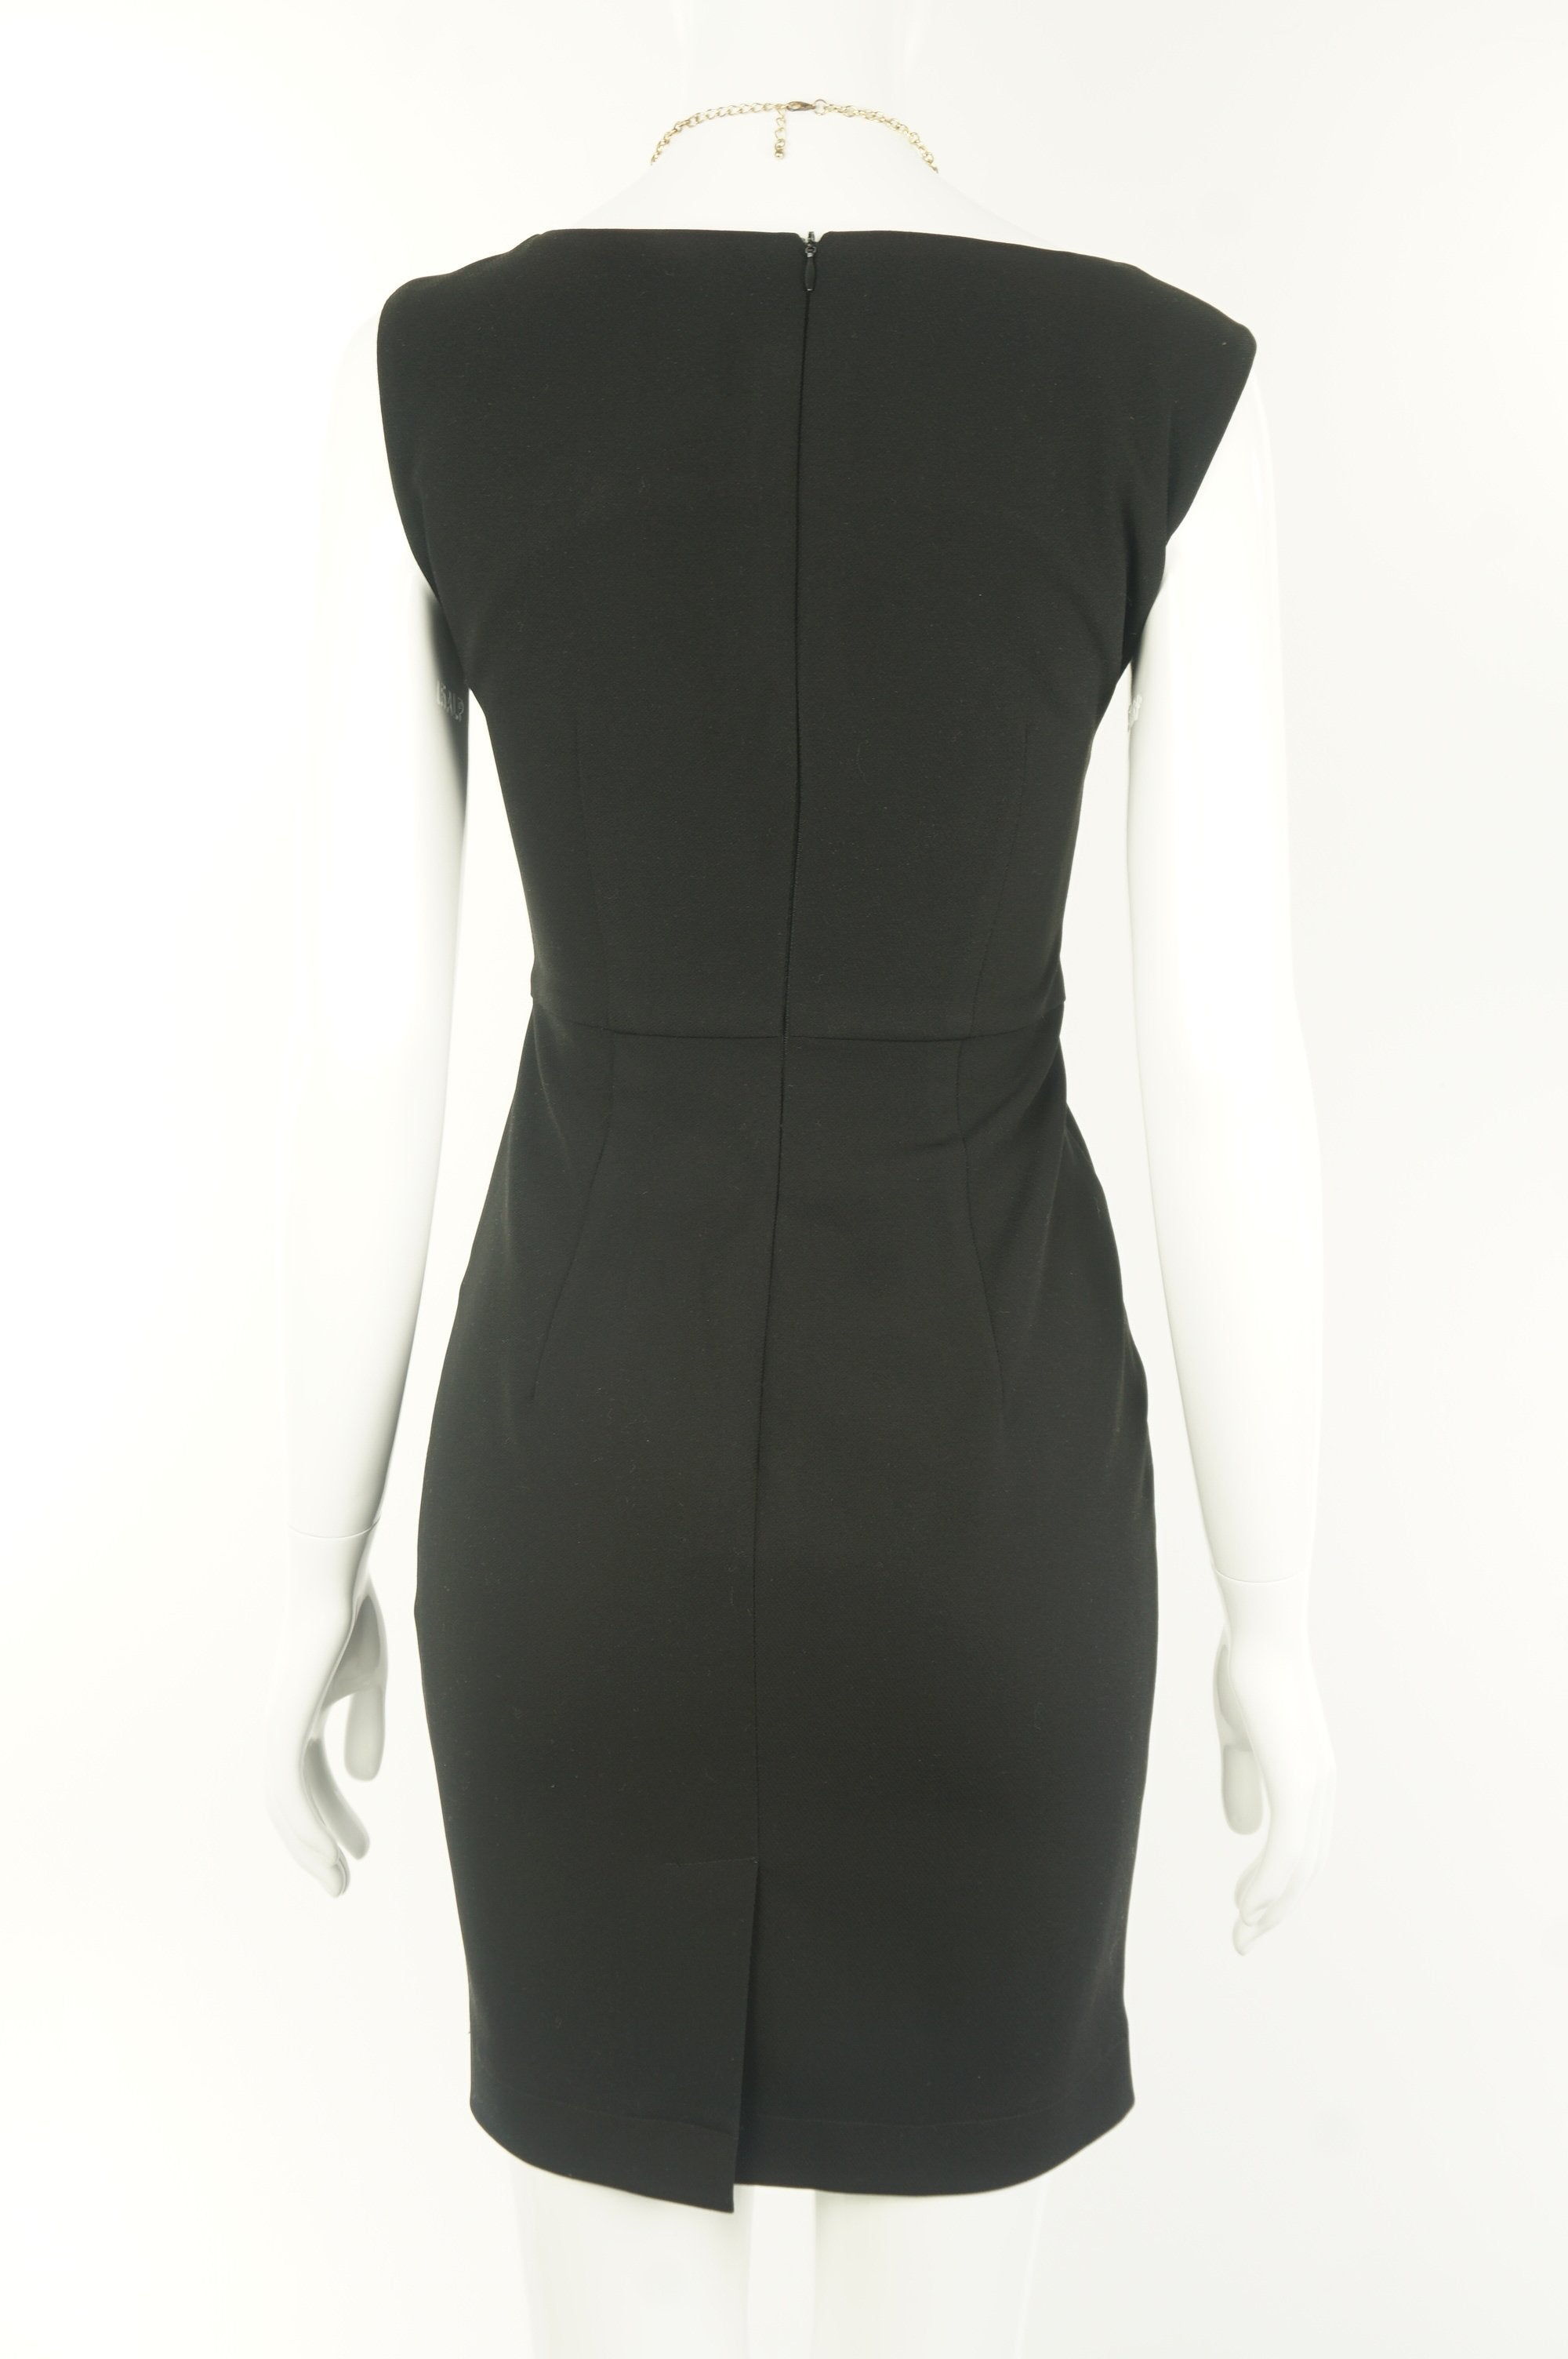 Moc Mien Business Formal Black Dress with one-side pocket, Dress for Success and we say yes to this one for you! Perfect for that job interview or the business meeting you're about to attend. , Black, 100% polyester, women's Dresses & Skirts, women's Black Dresses & Skirts, Moc Mien women's Dresses & Skirts, Dress for success, interview dress, professional black dress, women's professional dress, women's dress with one pocket